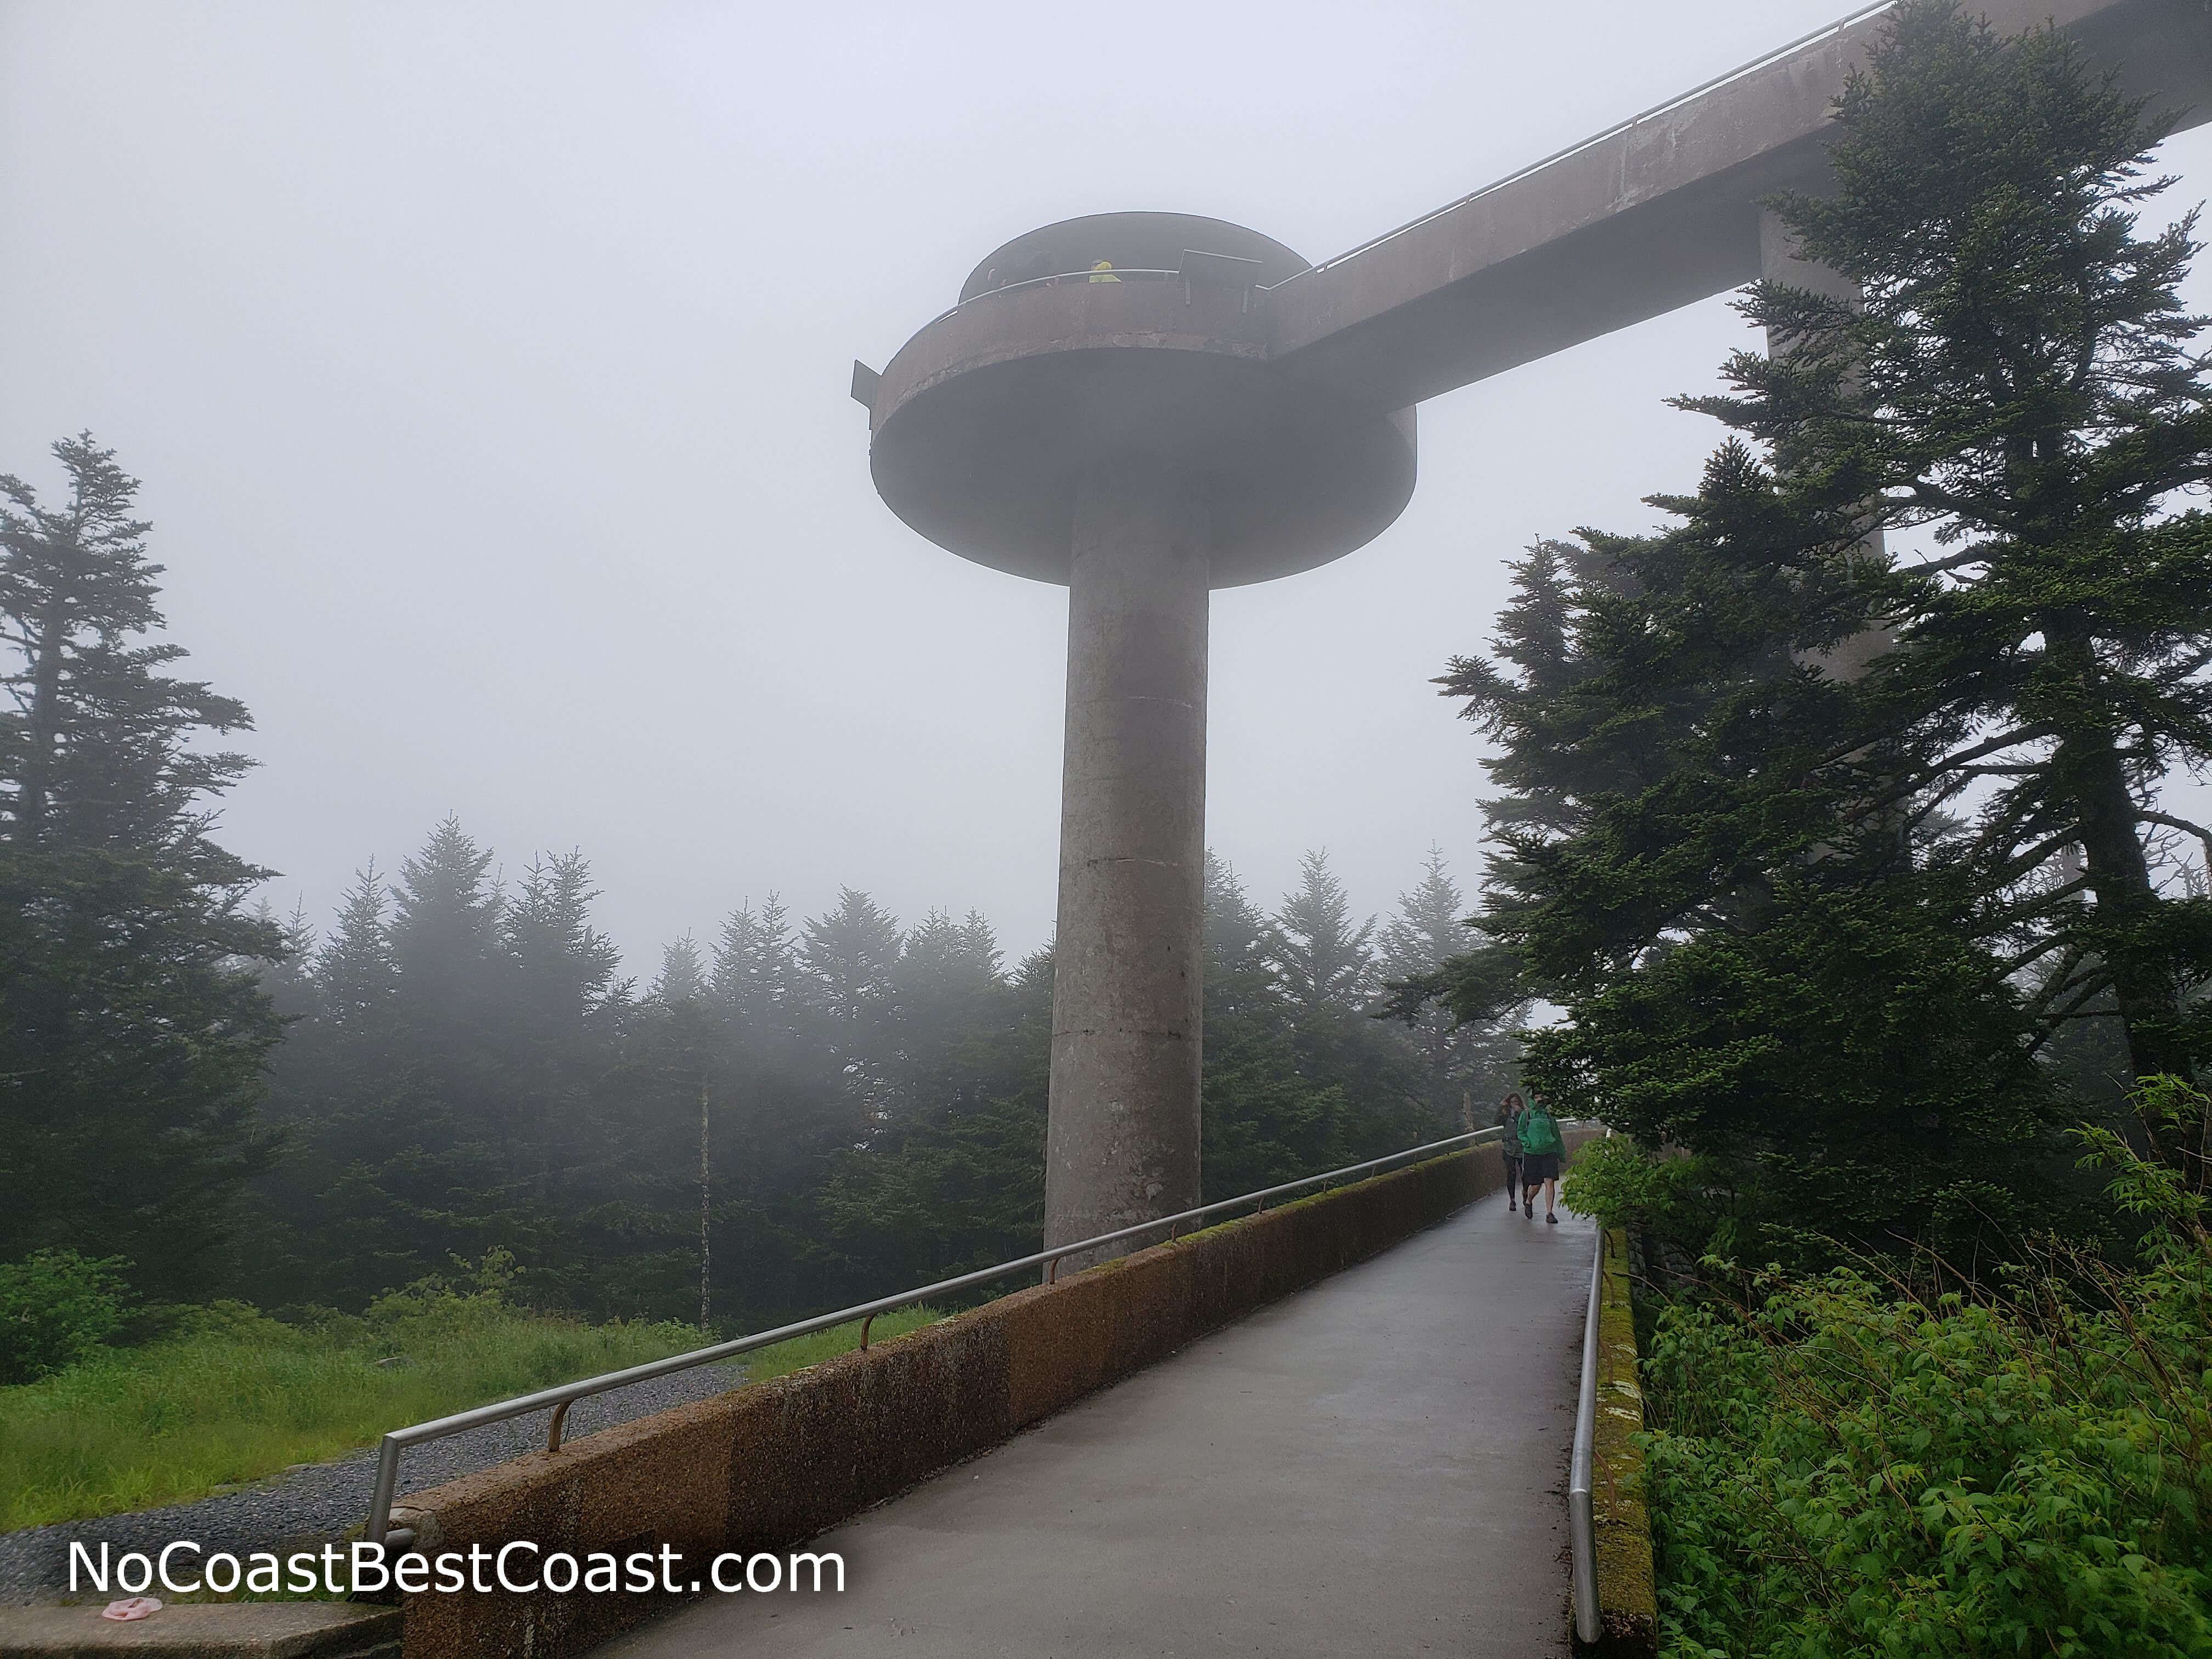 The concrete tower on the summit of Clingmans Dome